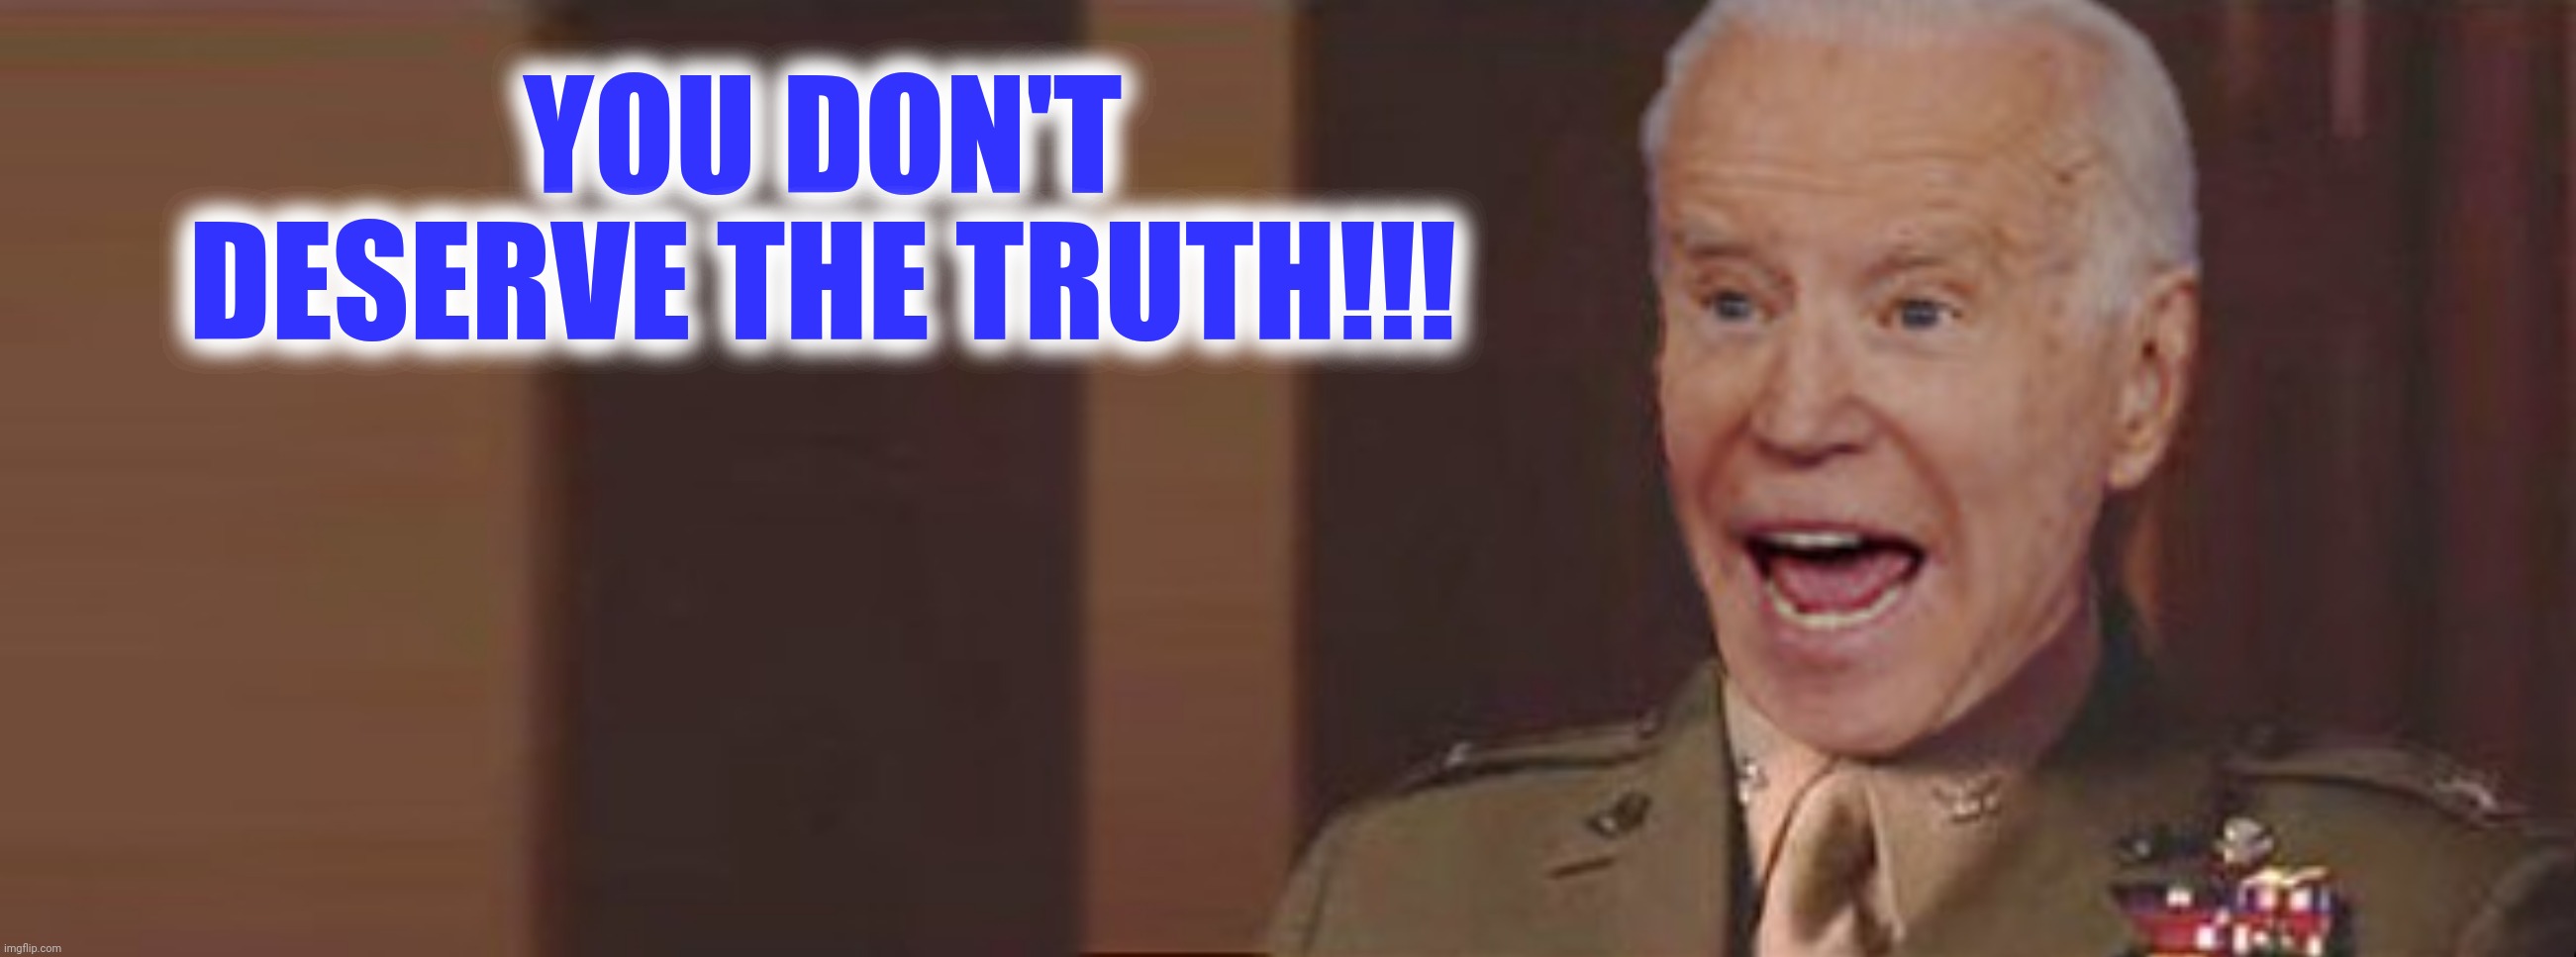 Bad Photoshop Sunday presents:  A few good men...and Joe | YOU DON'T DESERVE THE TRUTH!!! | image tagged in bad photoshop sunday,joe biden,you can't handle the truth,a few good men | made w/ Imgflip meme maker